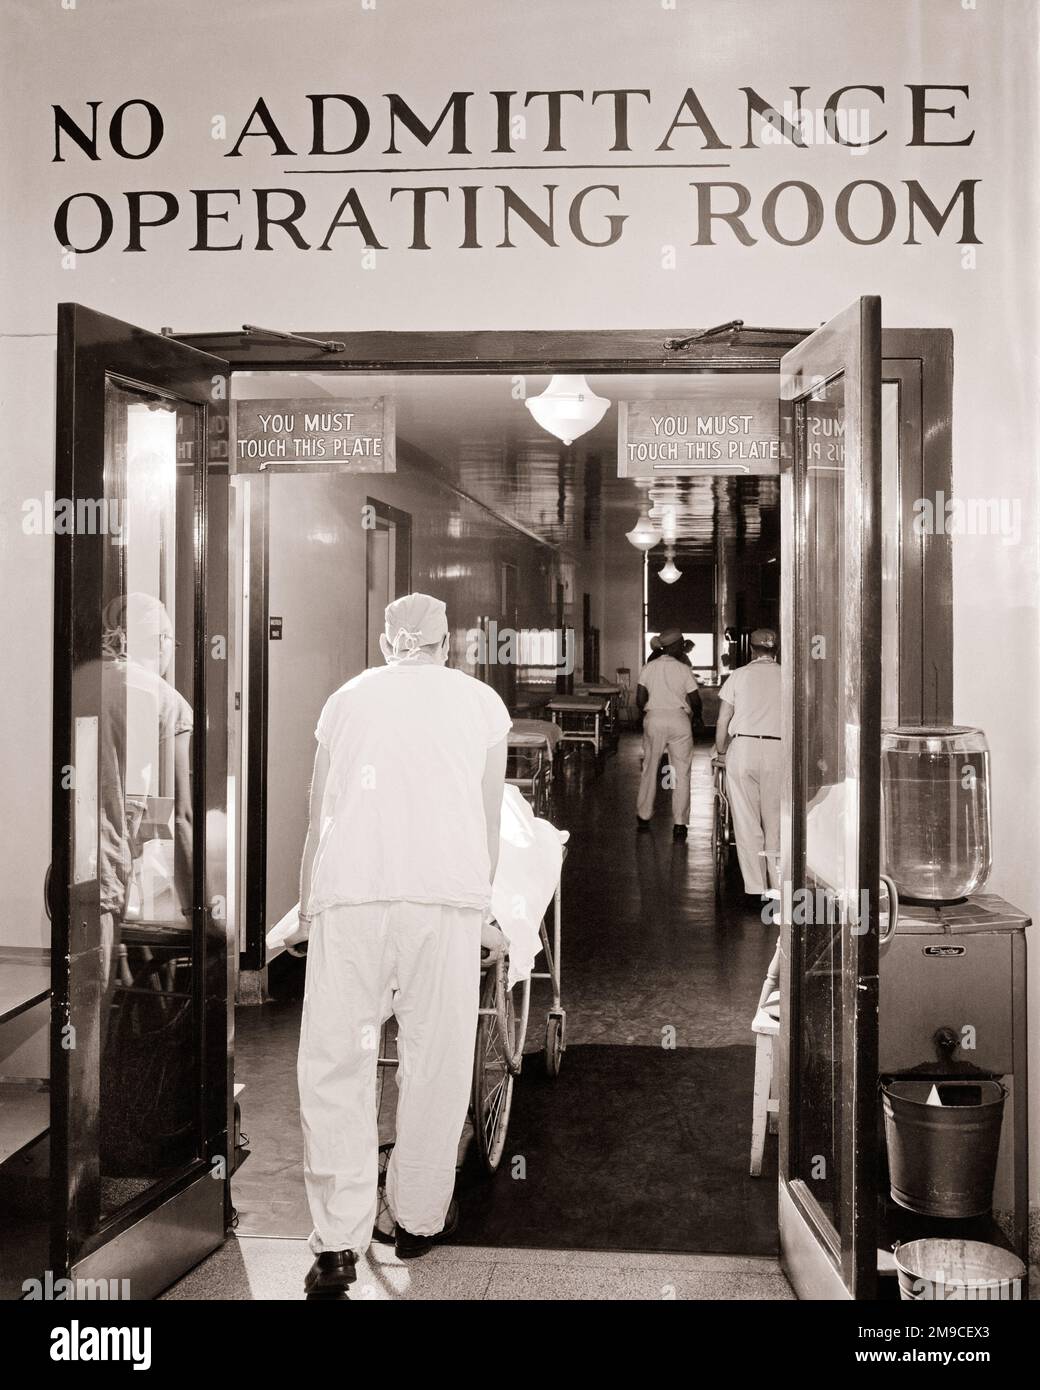 1950s BACK VIEW OF ORDERLY WEARING SCRUBS PUSHING GURNEY WITH PATIENT INTO THE OPERATING ROOM CORRIDOR SIGN SAYS NO ADMITTANCE - m1331 HAR001 HARS OCCUPATION OPERATING PREVENTION PROVIDER PROVIDERS PRACTITIONERS HEALING DIAGNOSIS GURNEY LOW ANGLE PHYSICIANS HEALTH CARE IMPAIRMENT OCCUPATIONS TREATMENT CORRIDOR HEALER HOSPITALS OPERATION ORDERLY PHYSICIAN PRACTITIONER SCRUBS FACILITY FACILITIES PROFESSIONALS SAYS BLACK AND WHITE CAUCASIAN ETHNICITY DISEASE HAR001 OLD FASHIONED Stock Photo